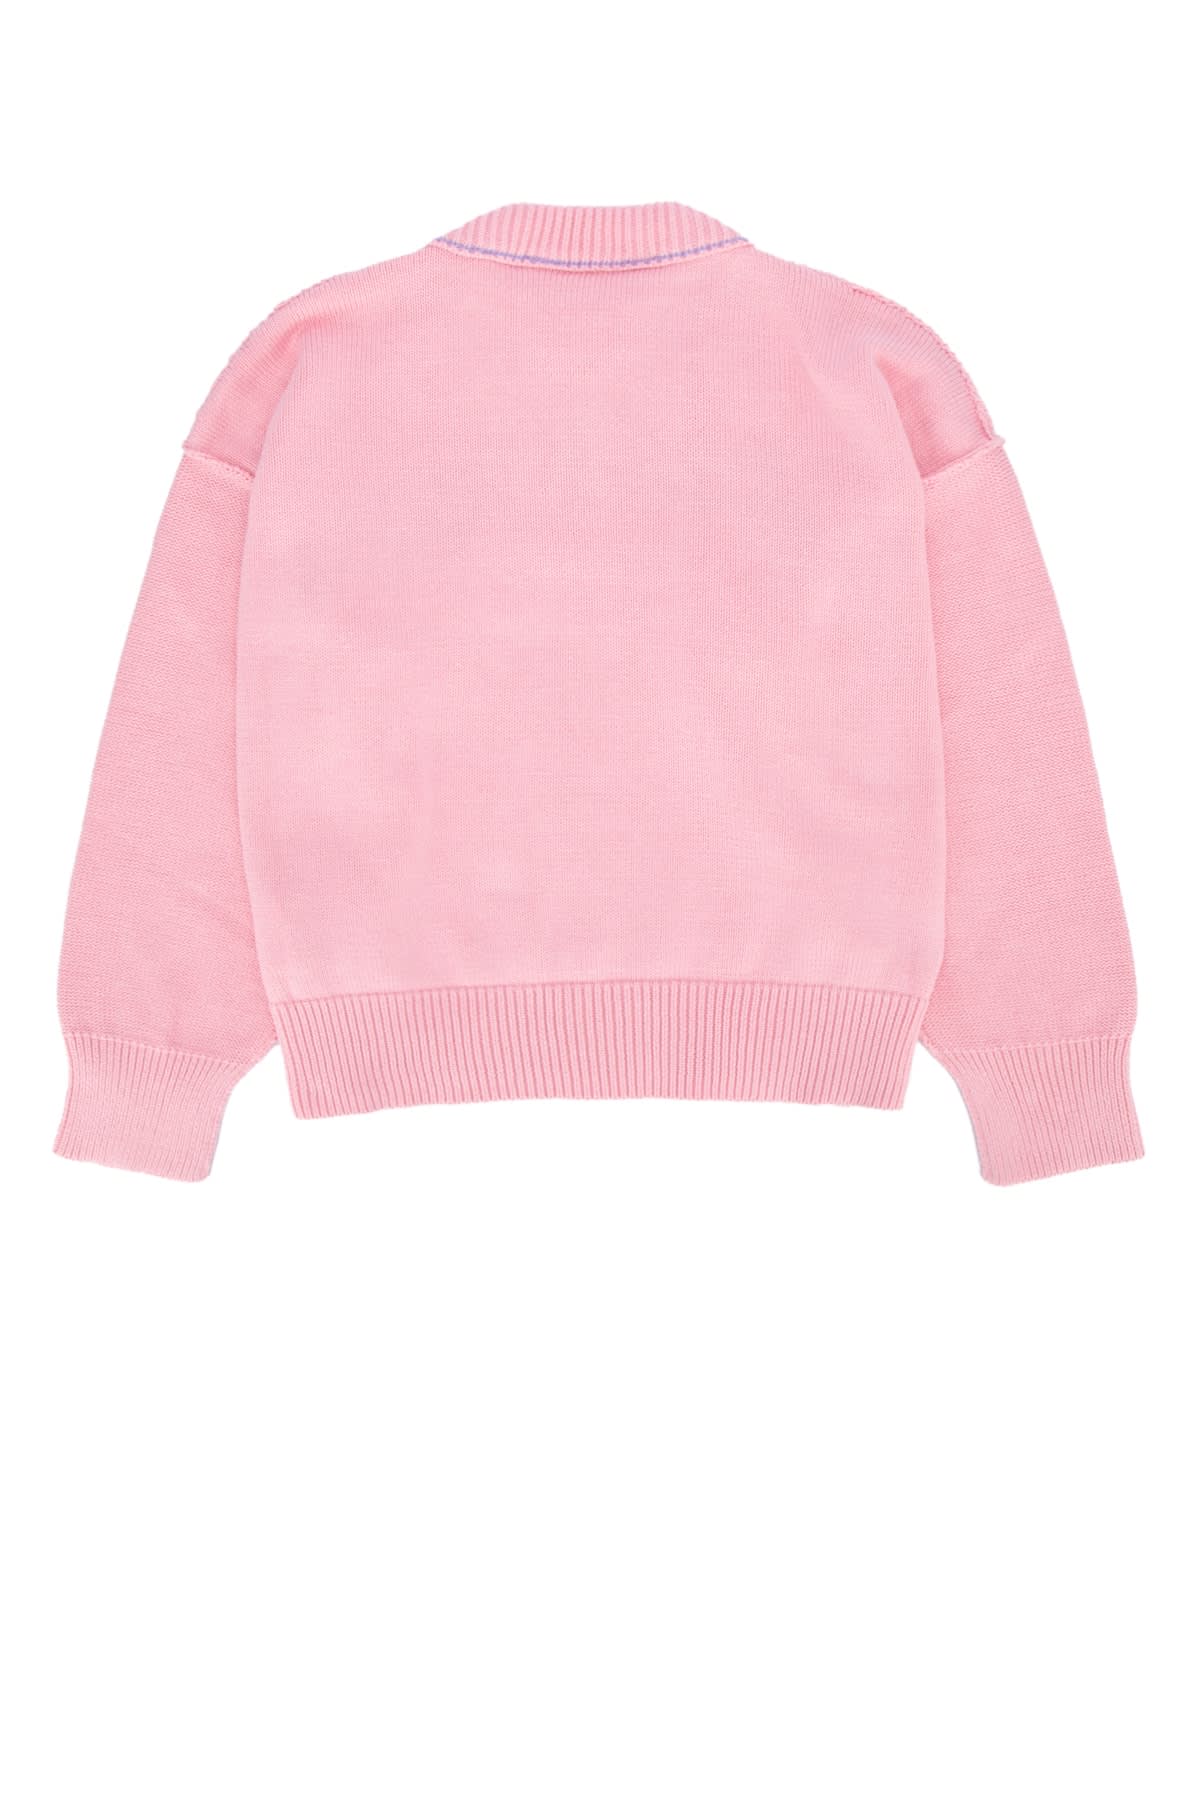 Palm Angels Kids' Maglieria In Rosequartzlilac